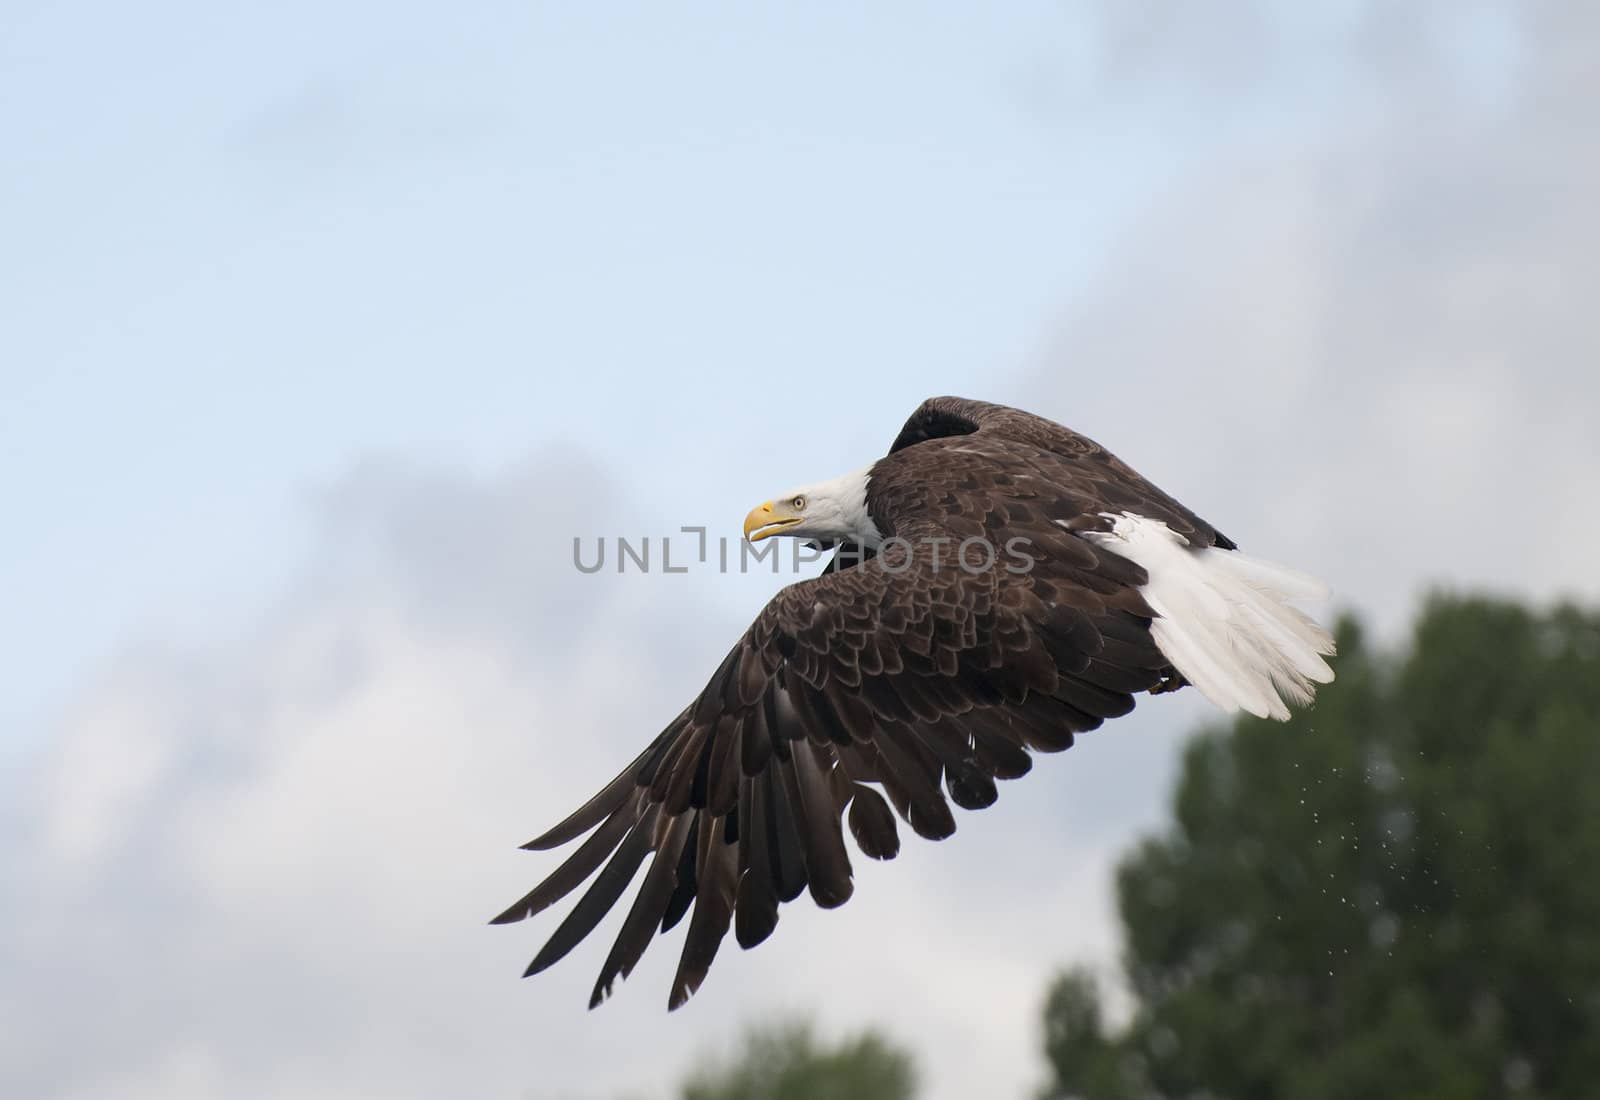 Selective focus on an intense bald eagle taking off with droplets of water flying below